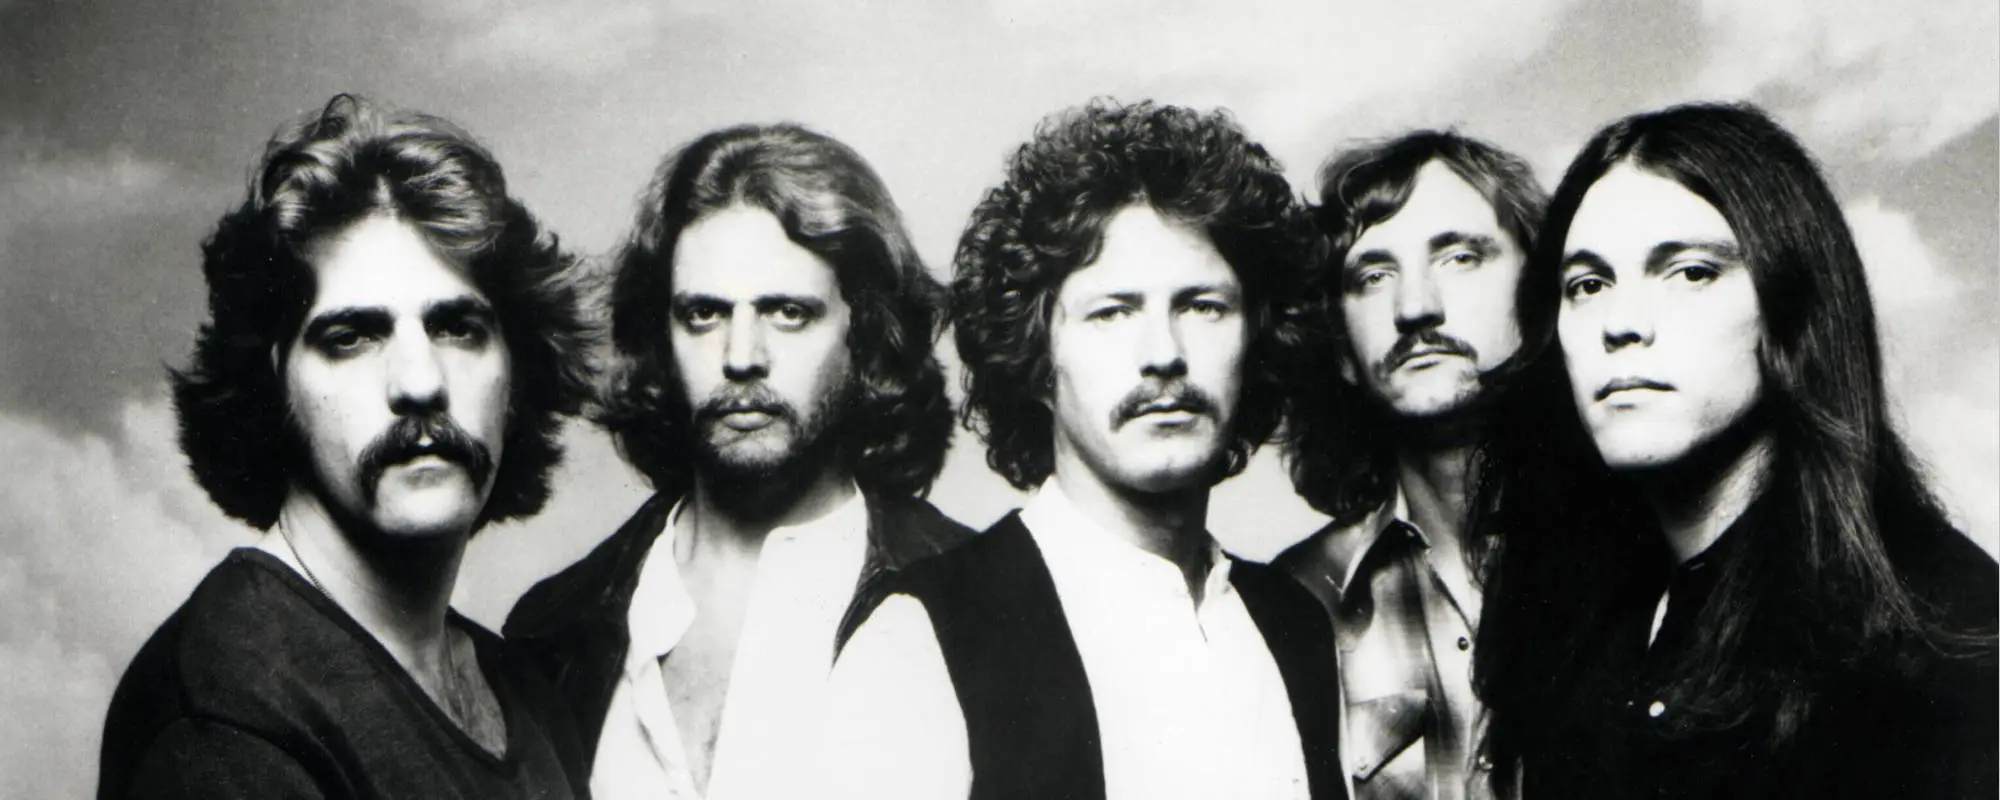 7 Classic Rock Bands That Ruled the 1970s